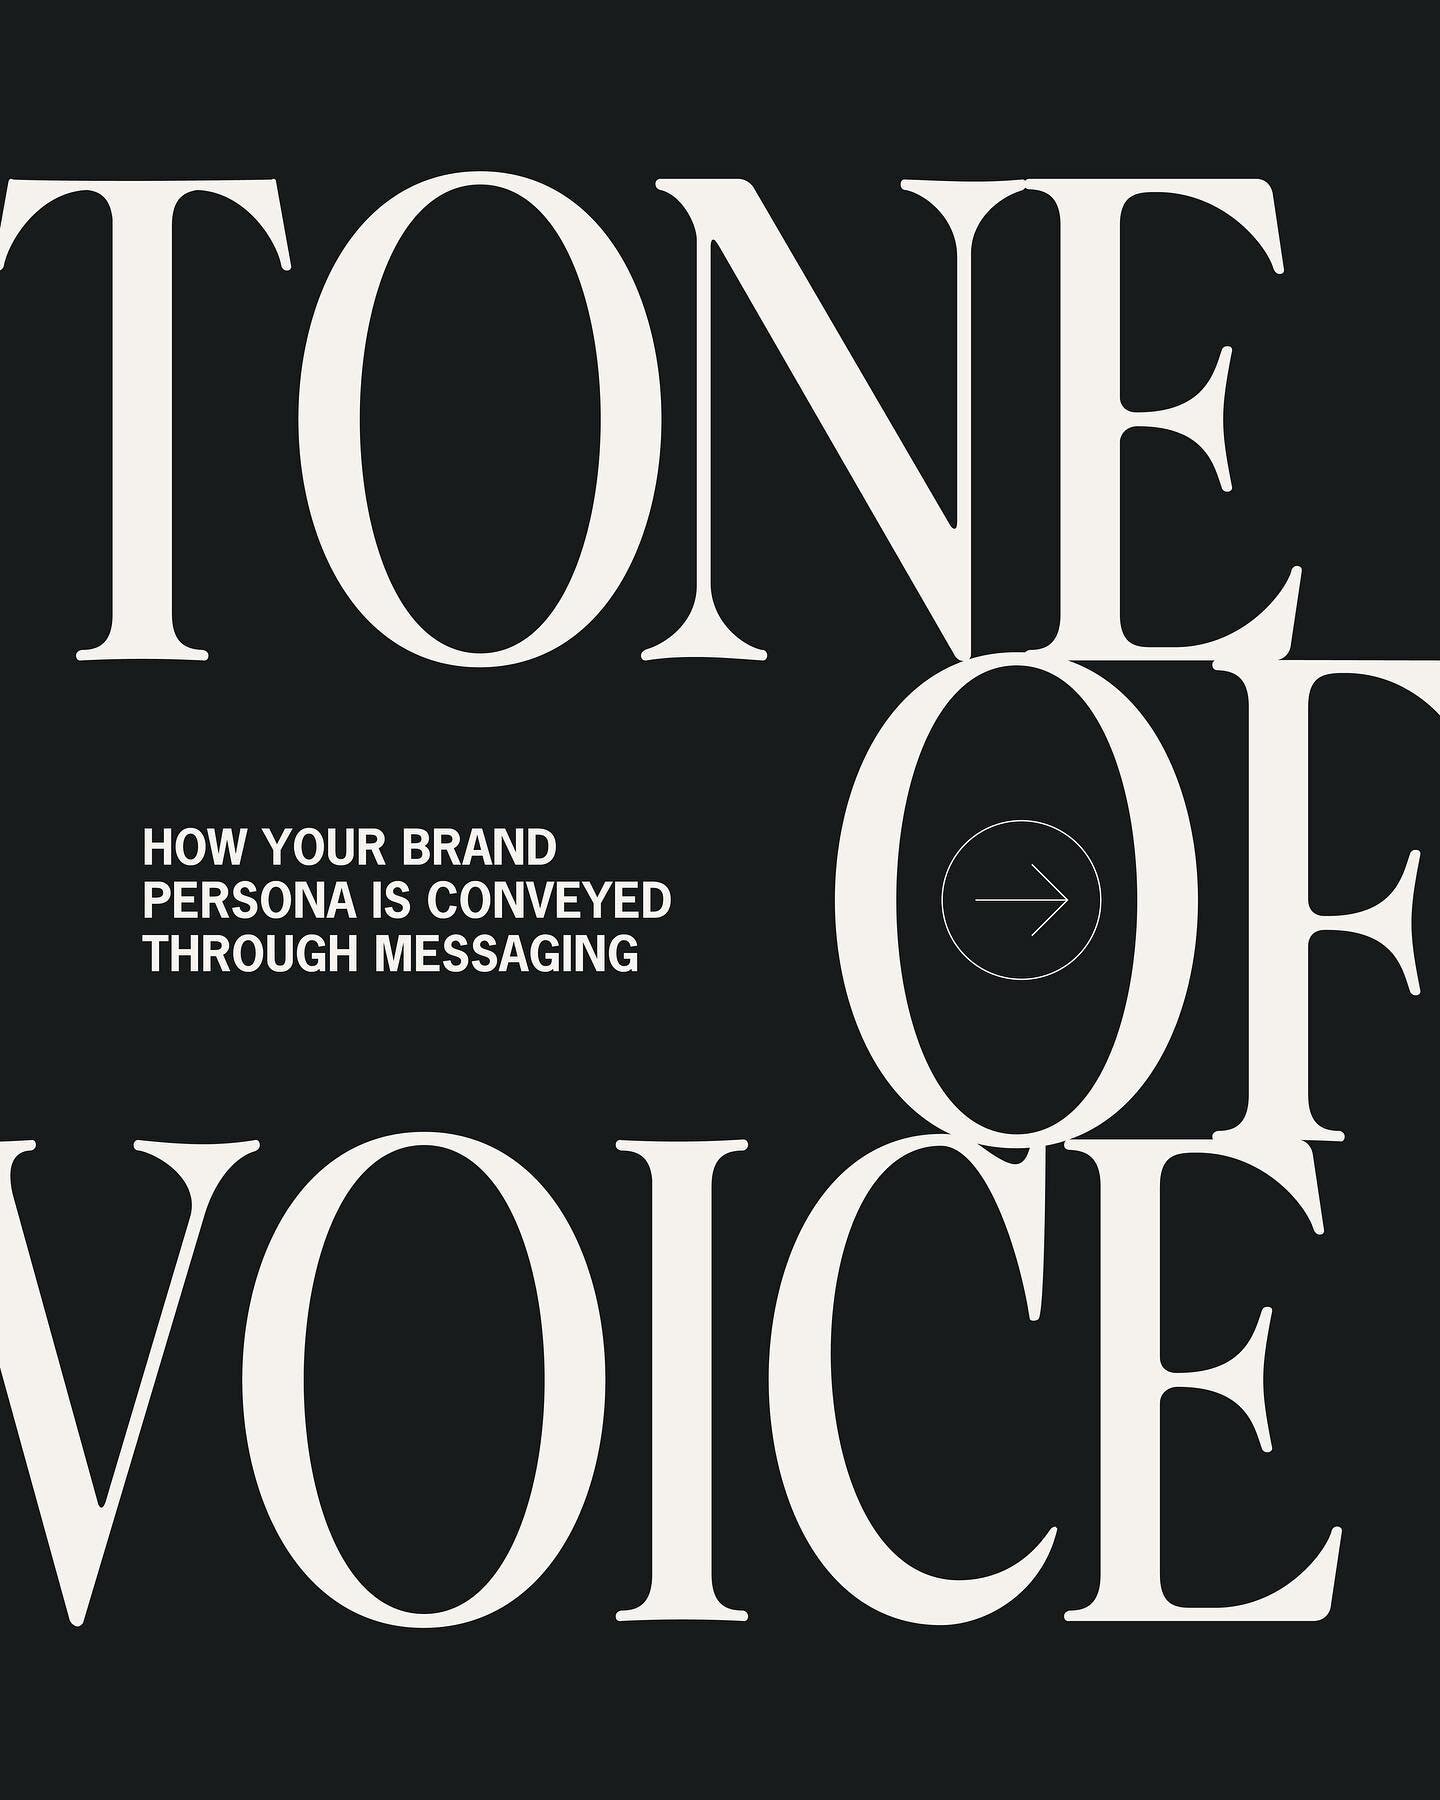 Tone of Voice. Brand Voice. No matter what you&rsquo;d like to call it, it is how your brand persona is conveyed through messaging. 

The particular mood or emotion that is conveyed to the audience through specific word choices and messaging styles i